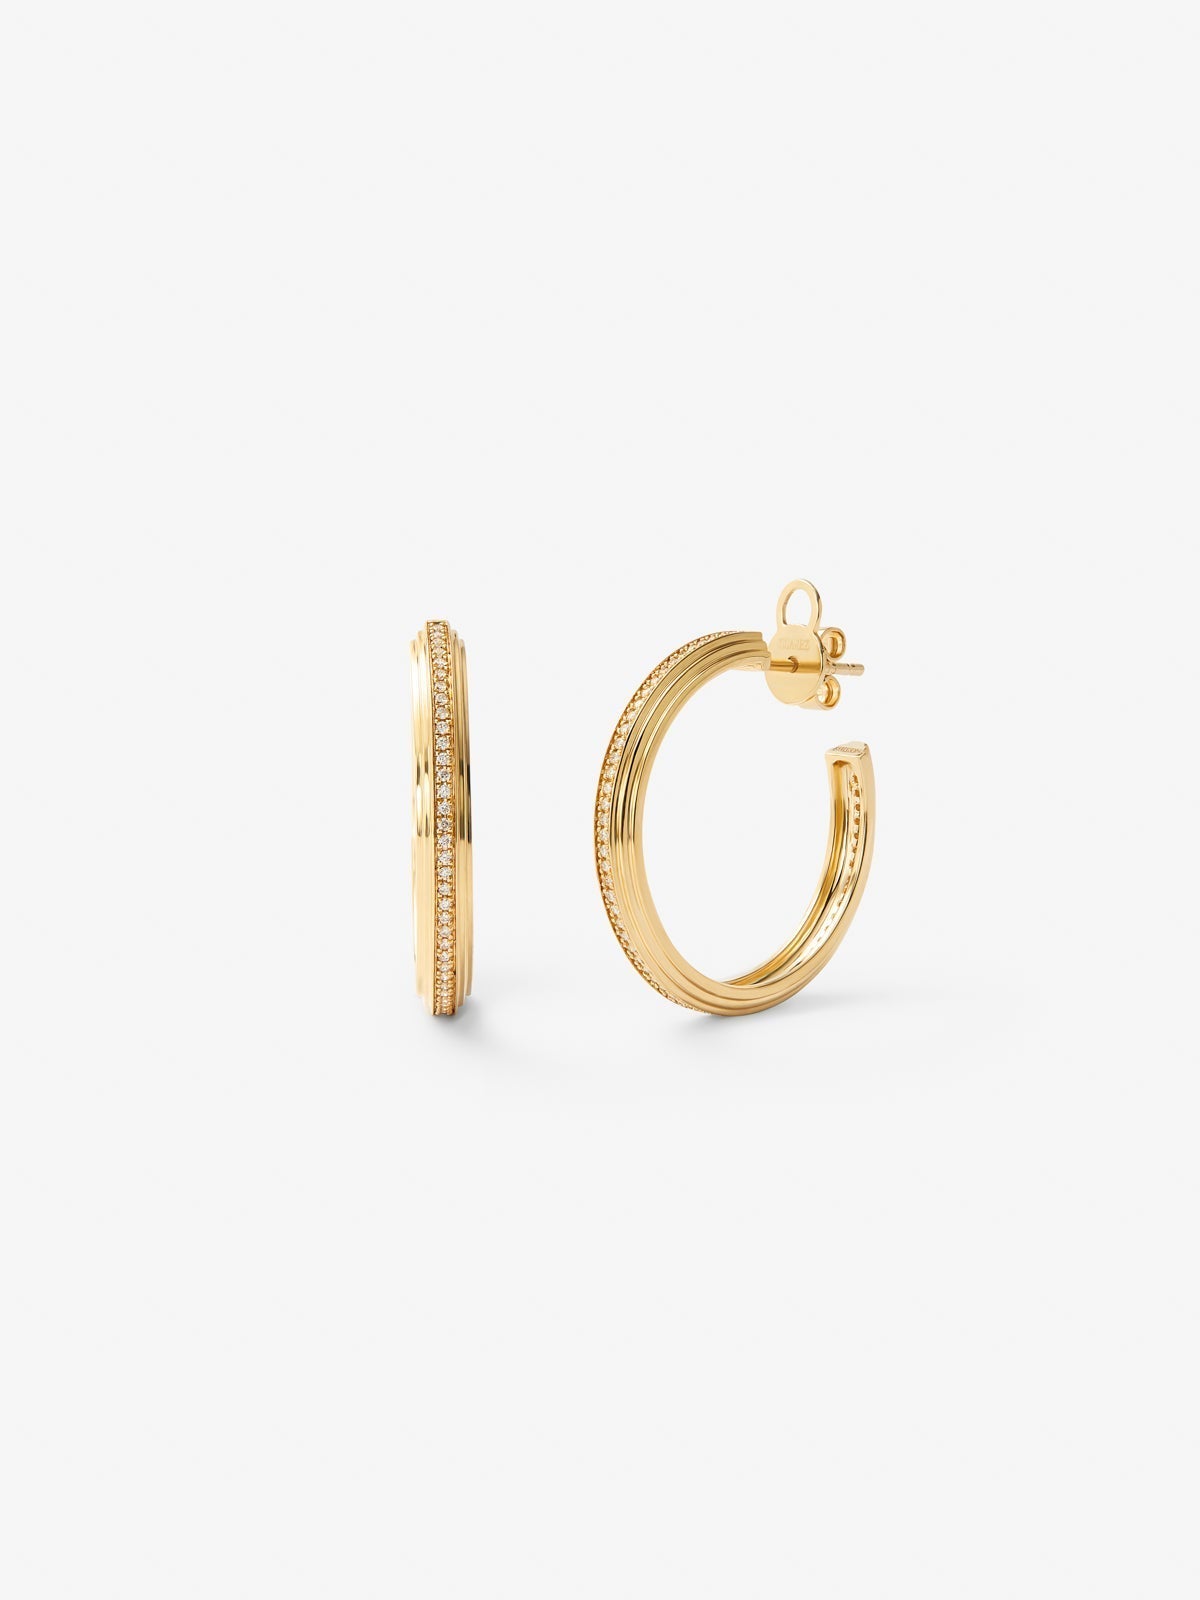 18K yellow gold hoop earrings with 124 brilliant-cut diamonds with a total of 0.3 cts